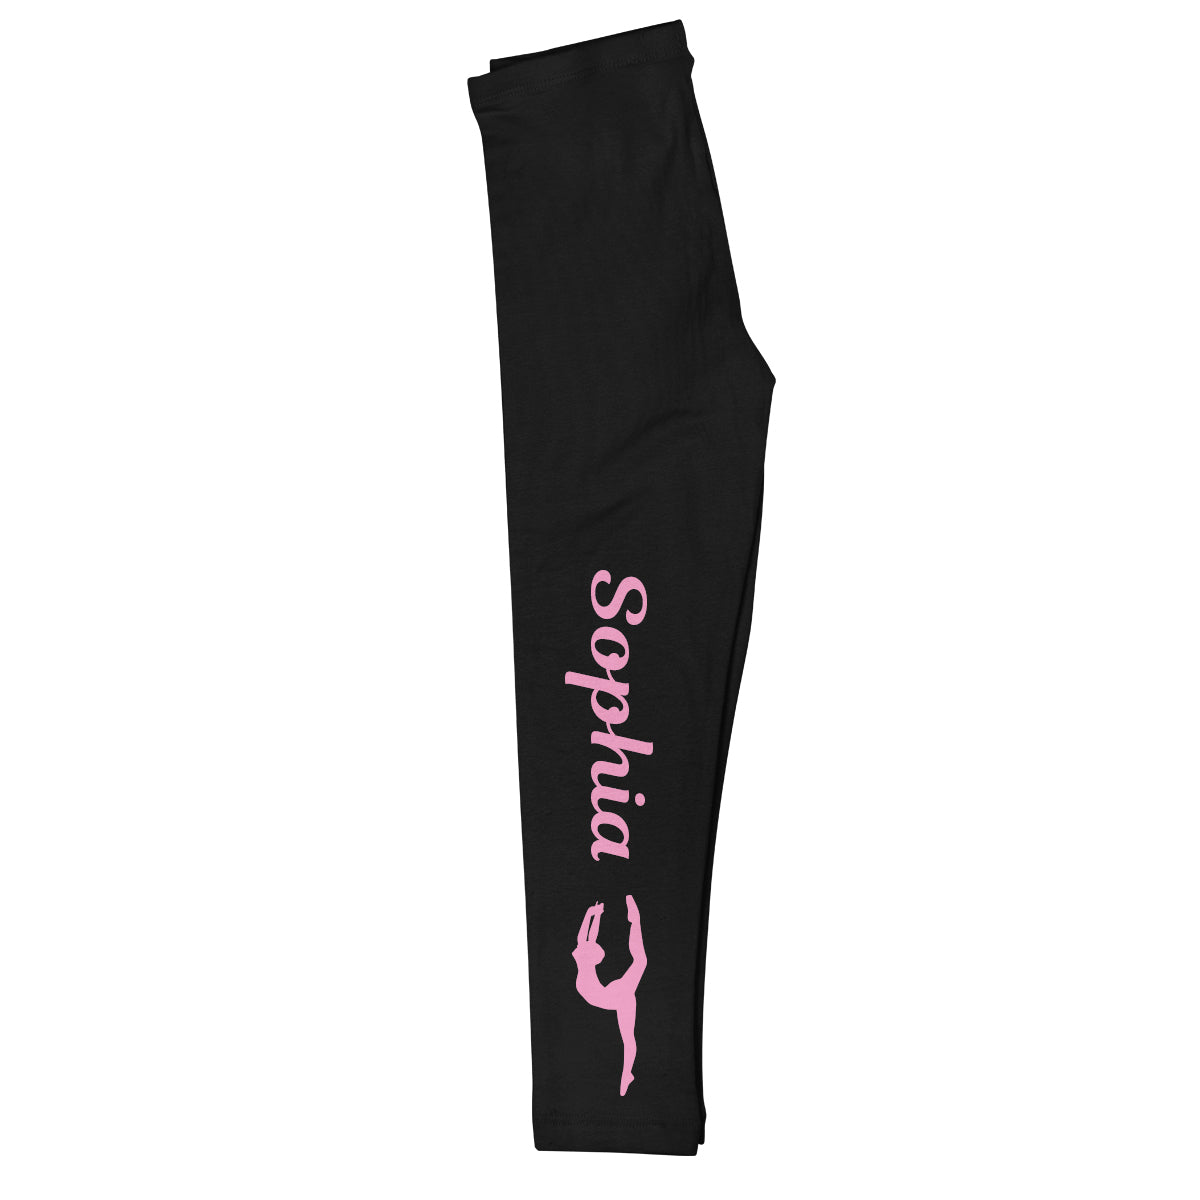 Black and pink dancer silhouette girls leggings with name - Wimziy&Co.